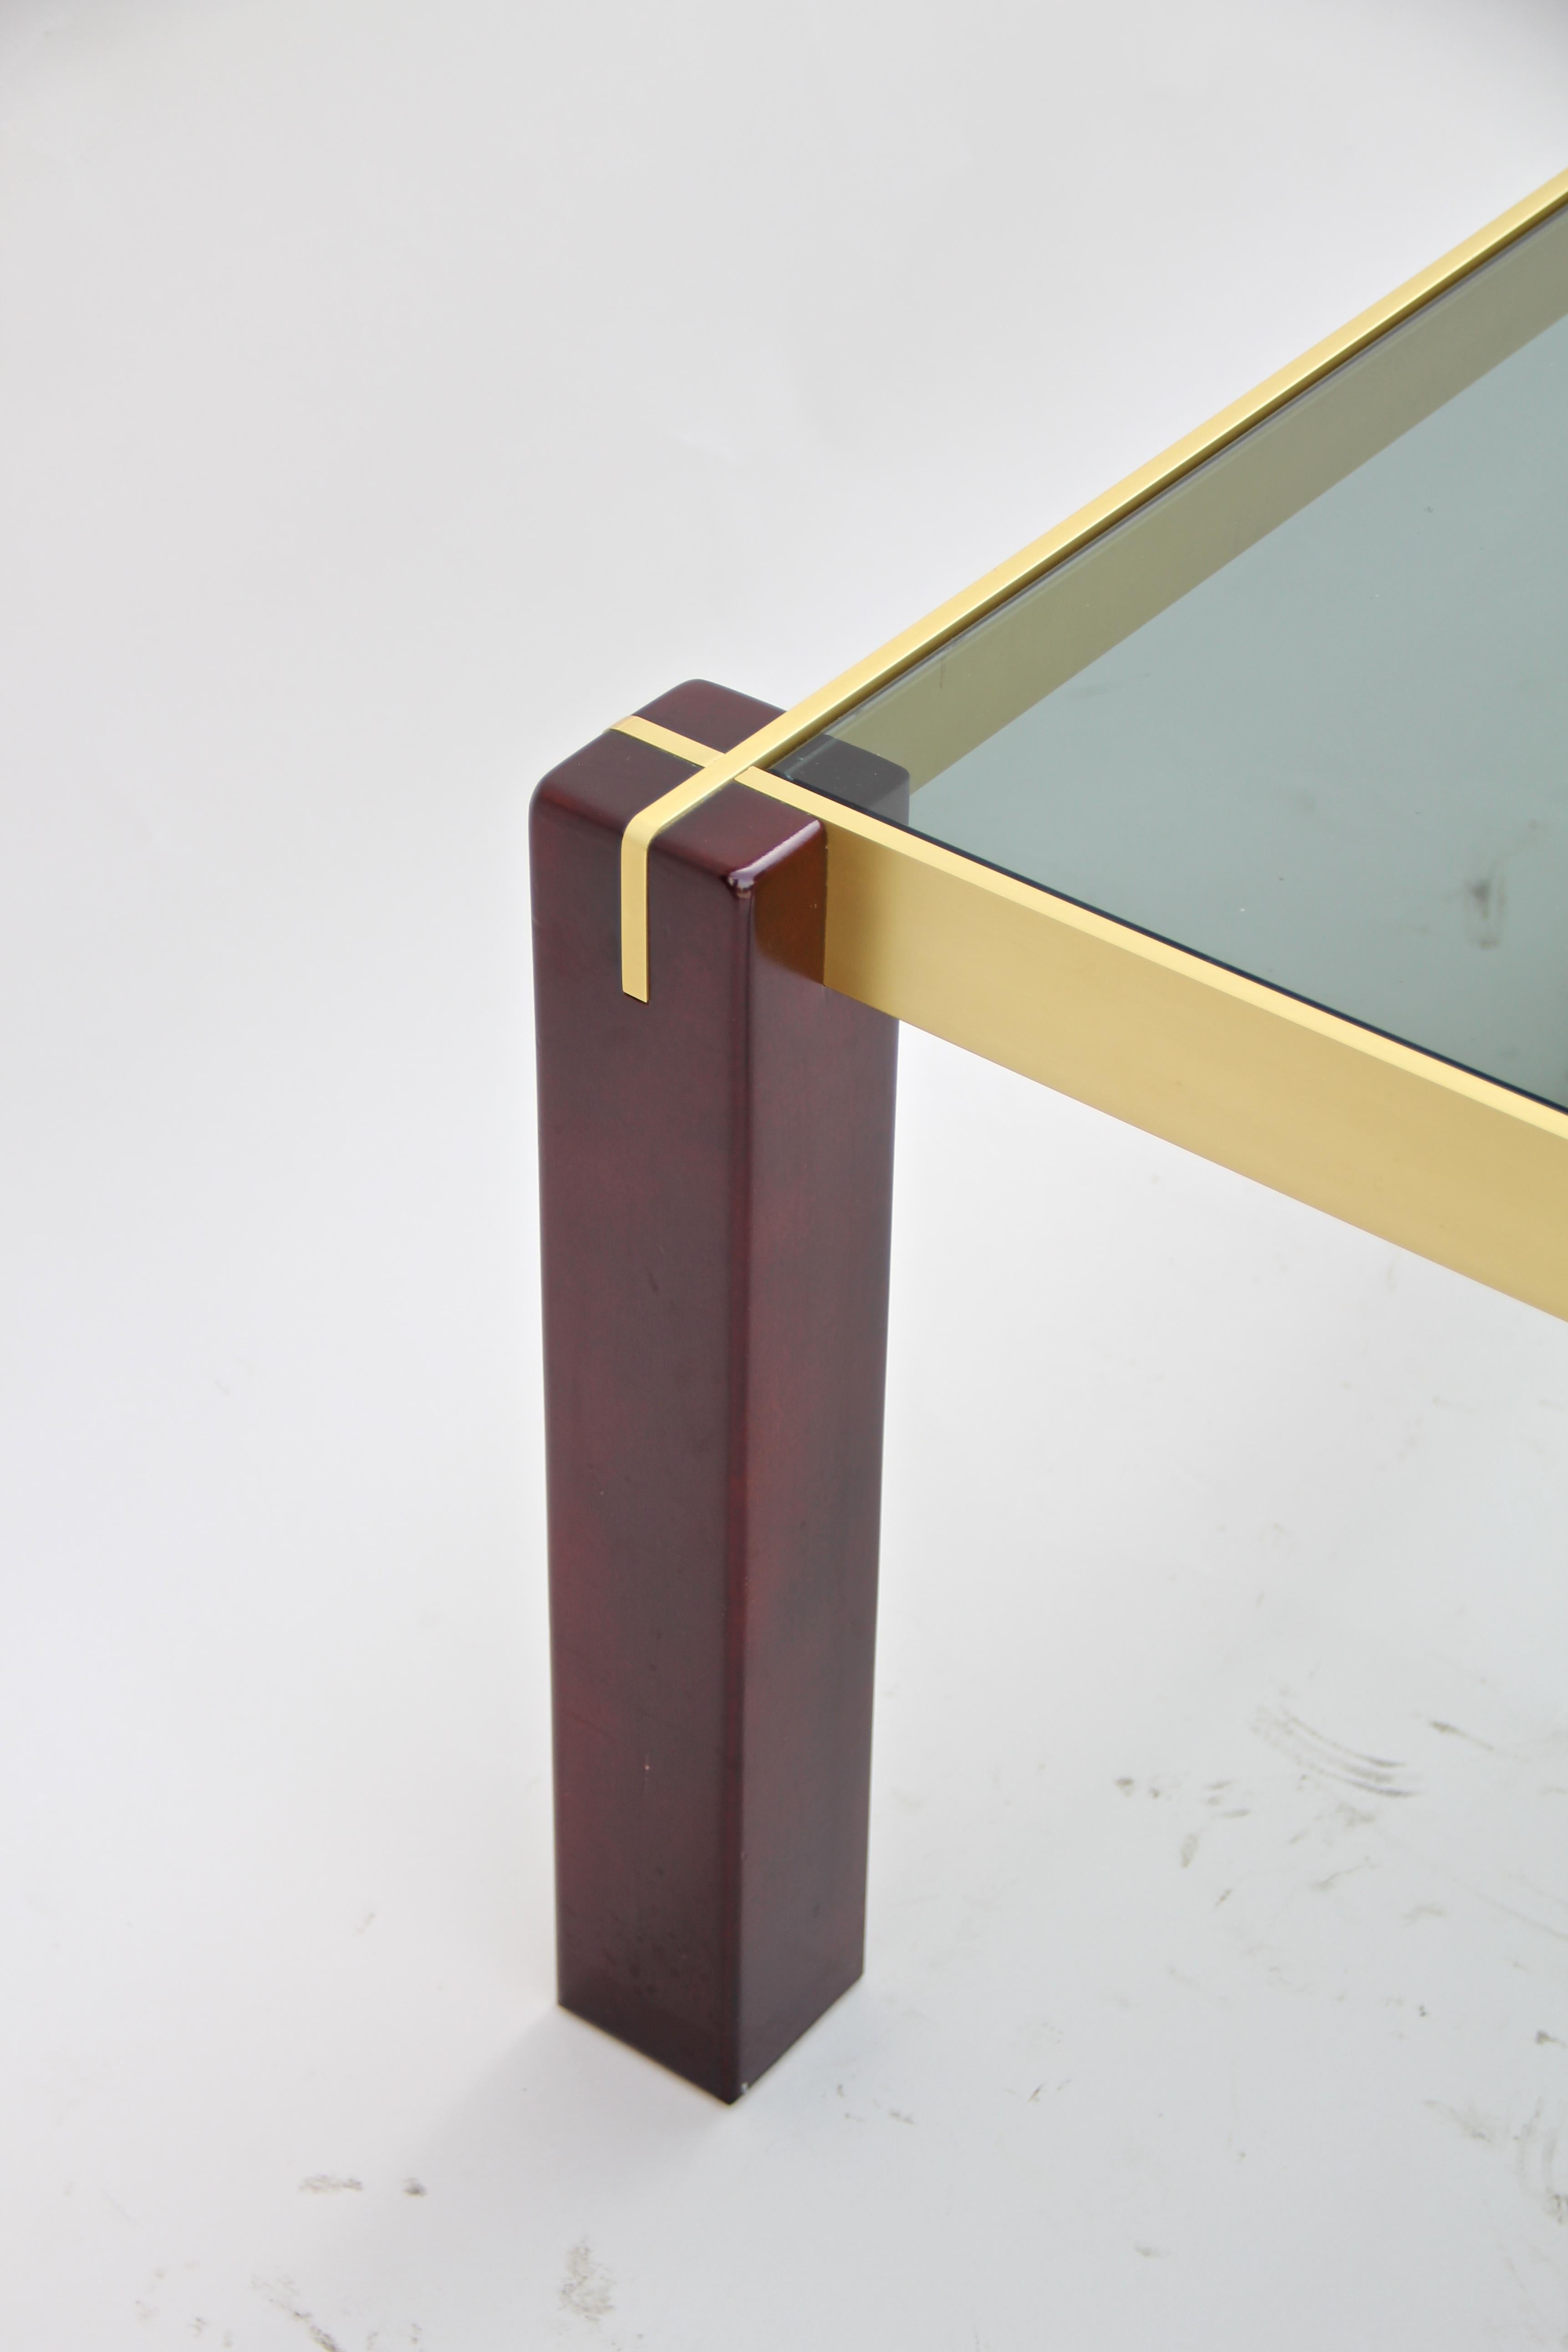 20th Century Midcentury Side Table with Brass Bars and Smoked Glass, Italy, circa 1960 For Sale